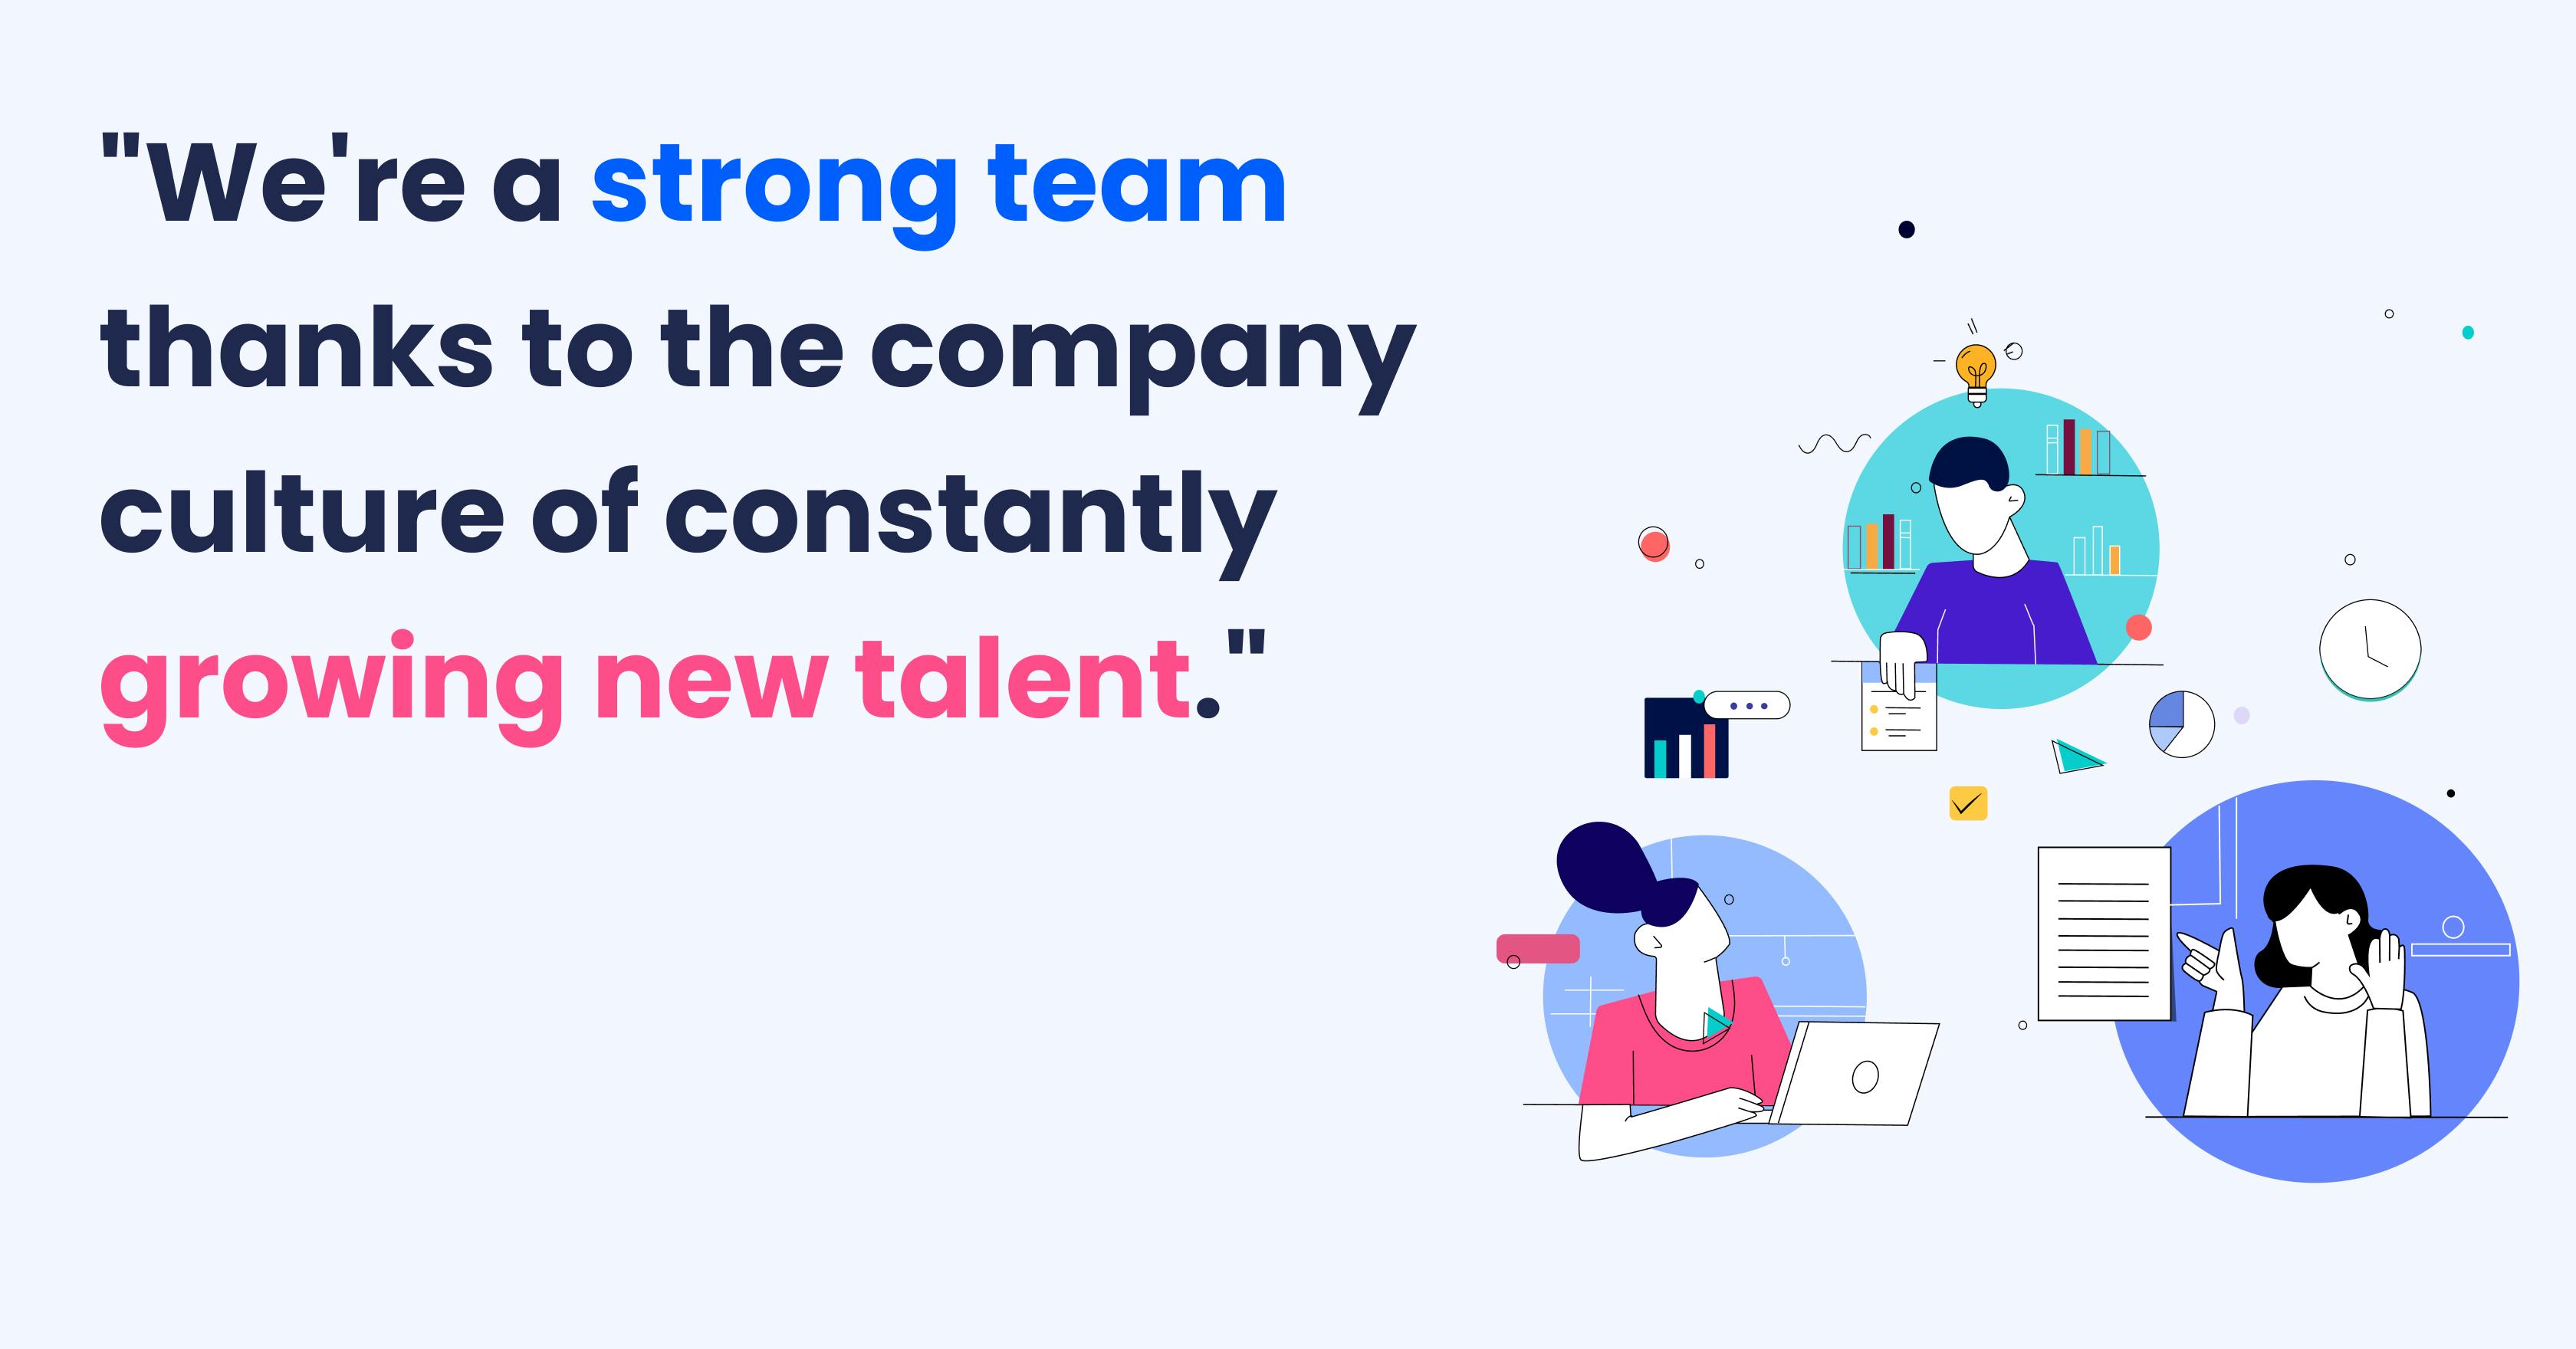 Nightborn - We are a strong team thanks to the company culture of constantly growing new talent